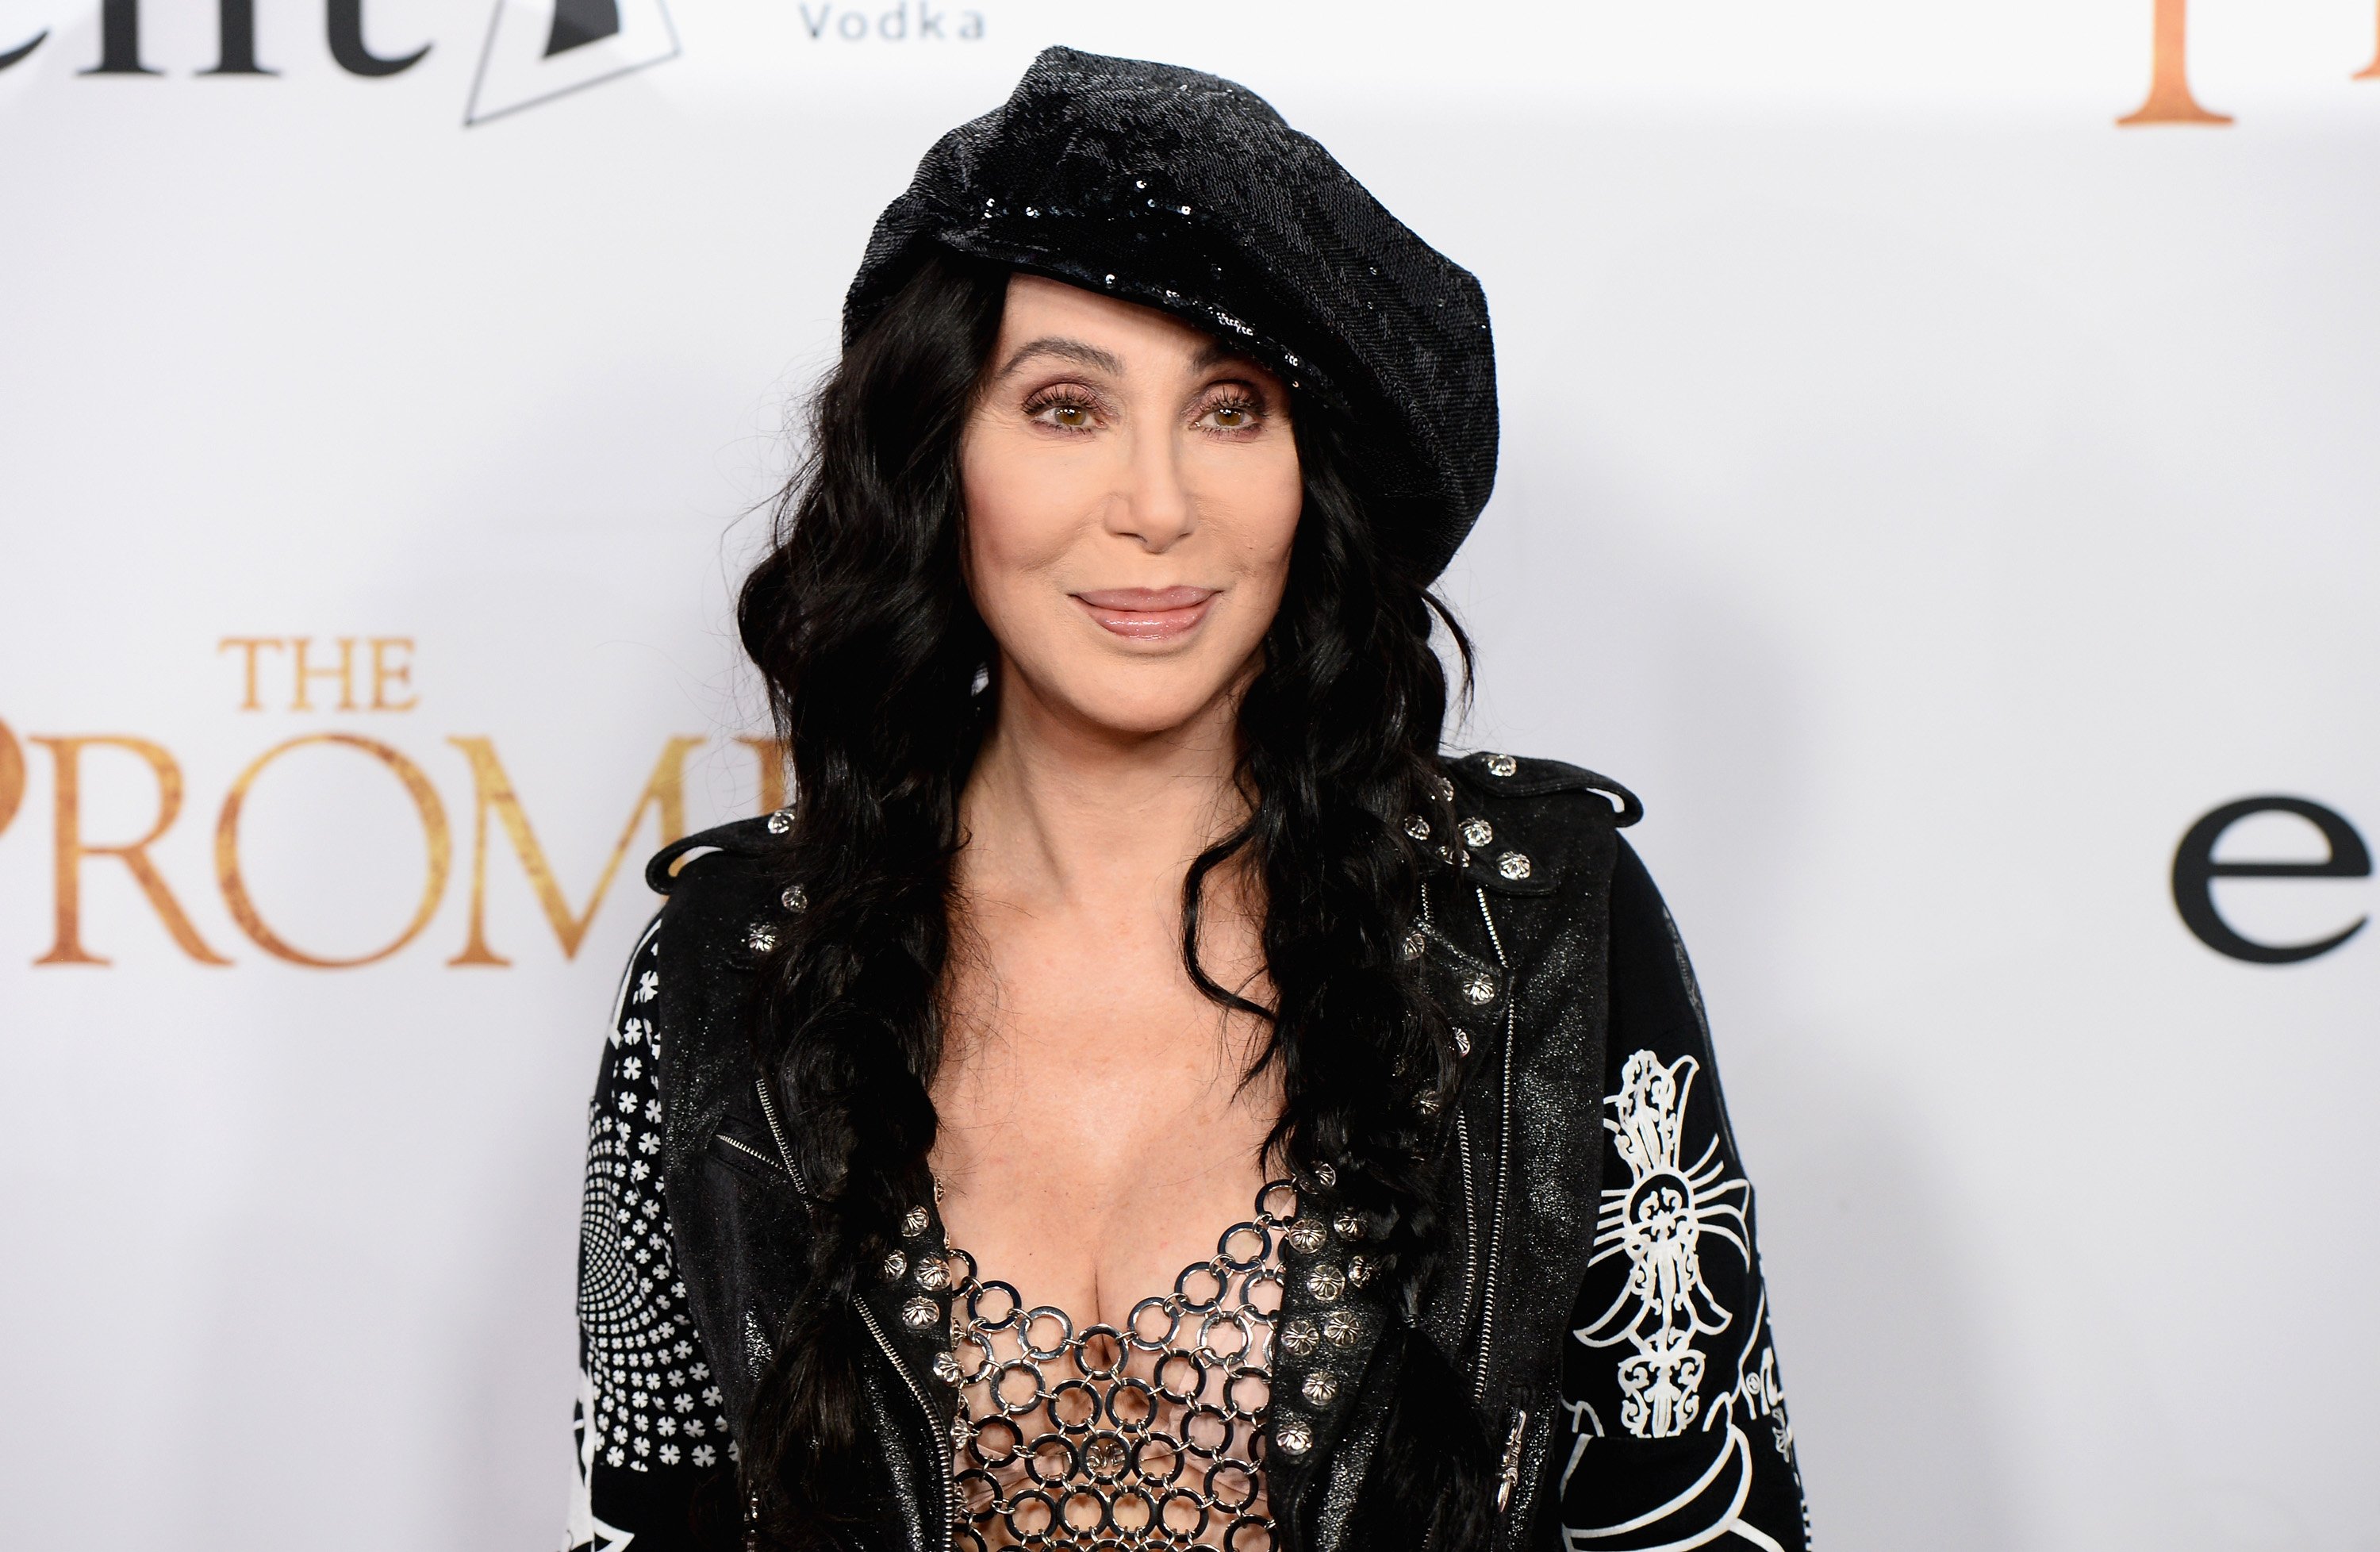 Cher posing for the camera in a black hat.